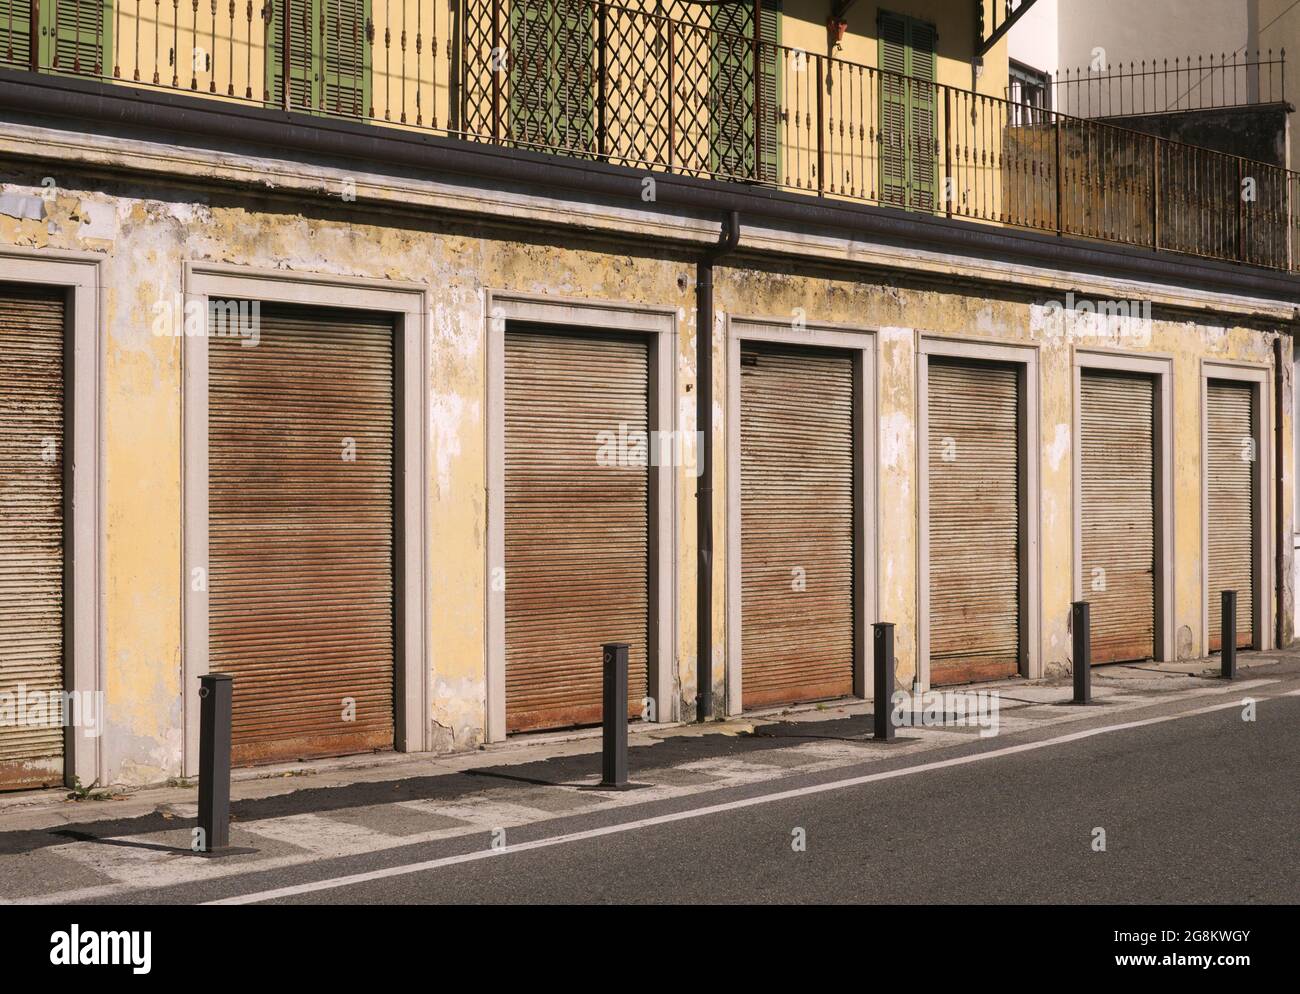 Row of shops with shutters down, Italy Stock Photo